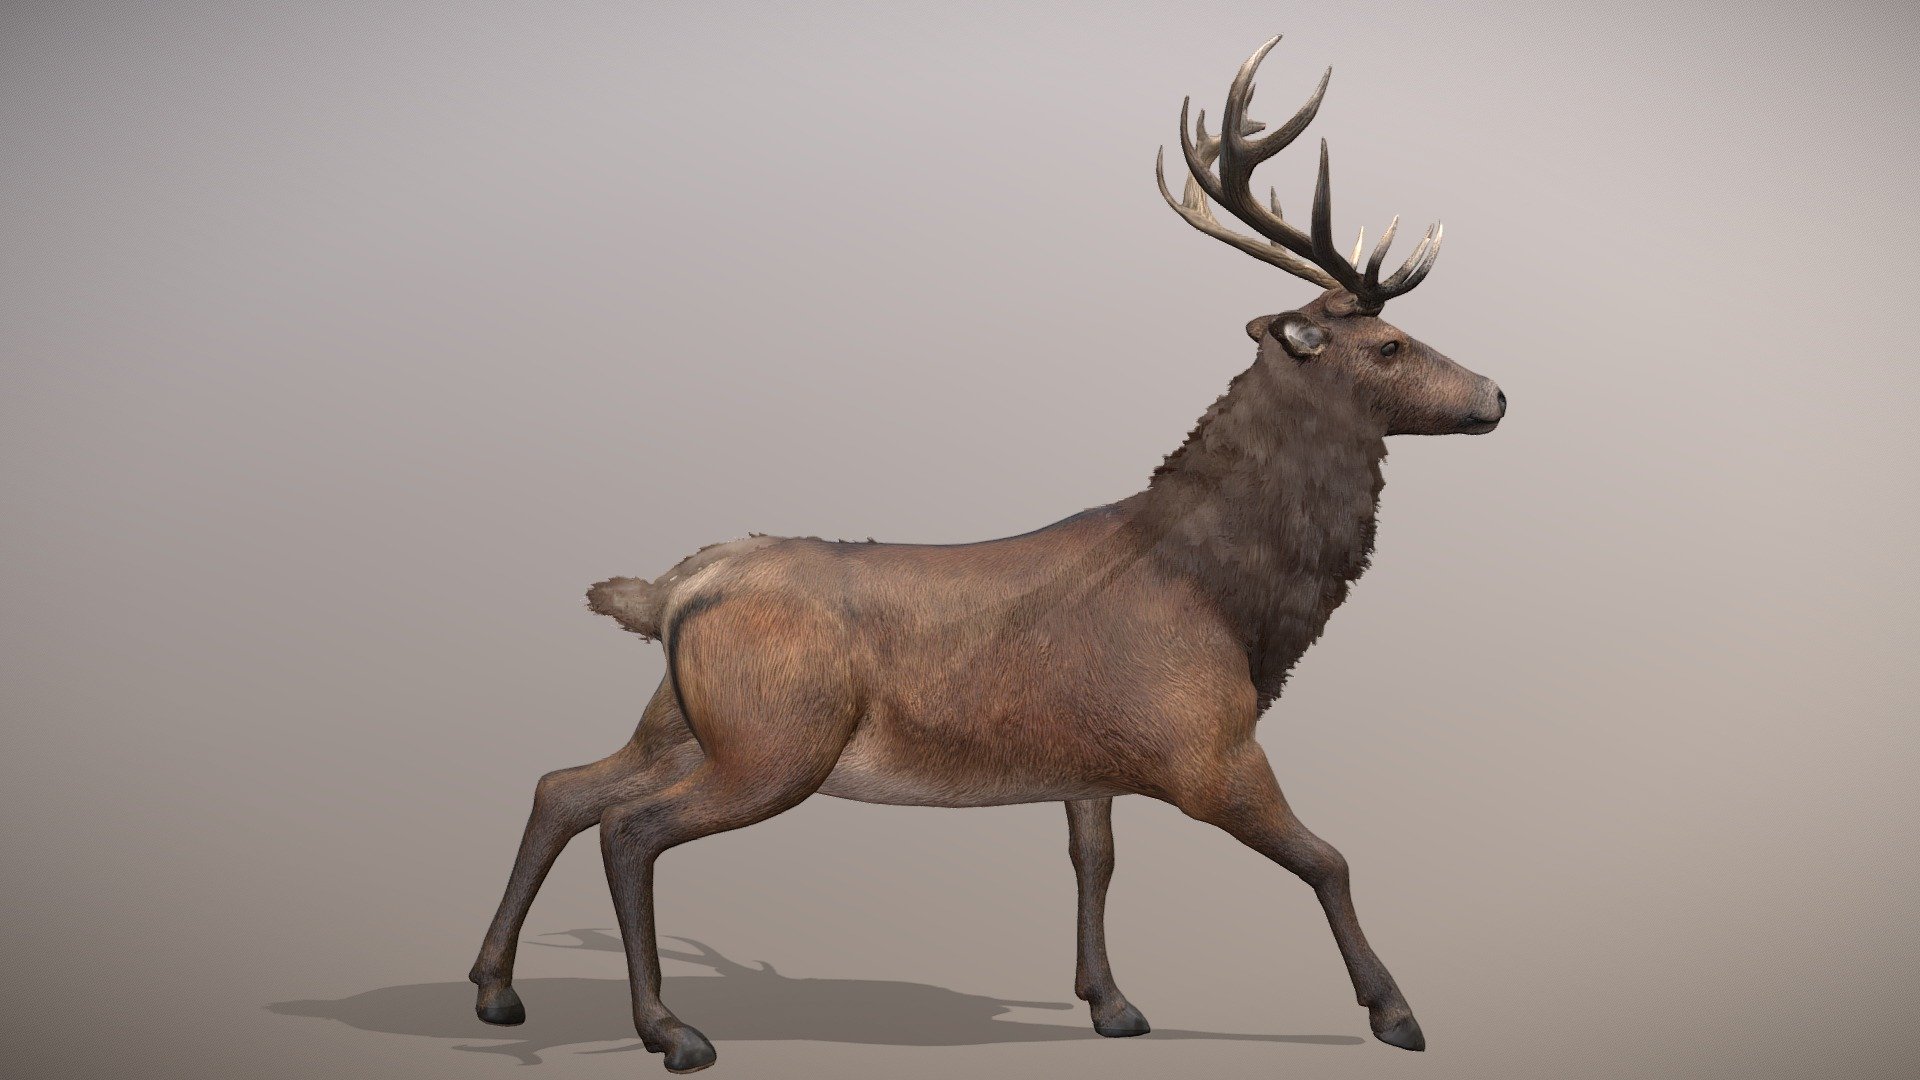 Deer run cycle animated
in fbx file format - Red Deer Animated - 3D model by monstermod 3d model